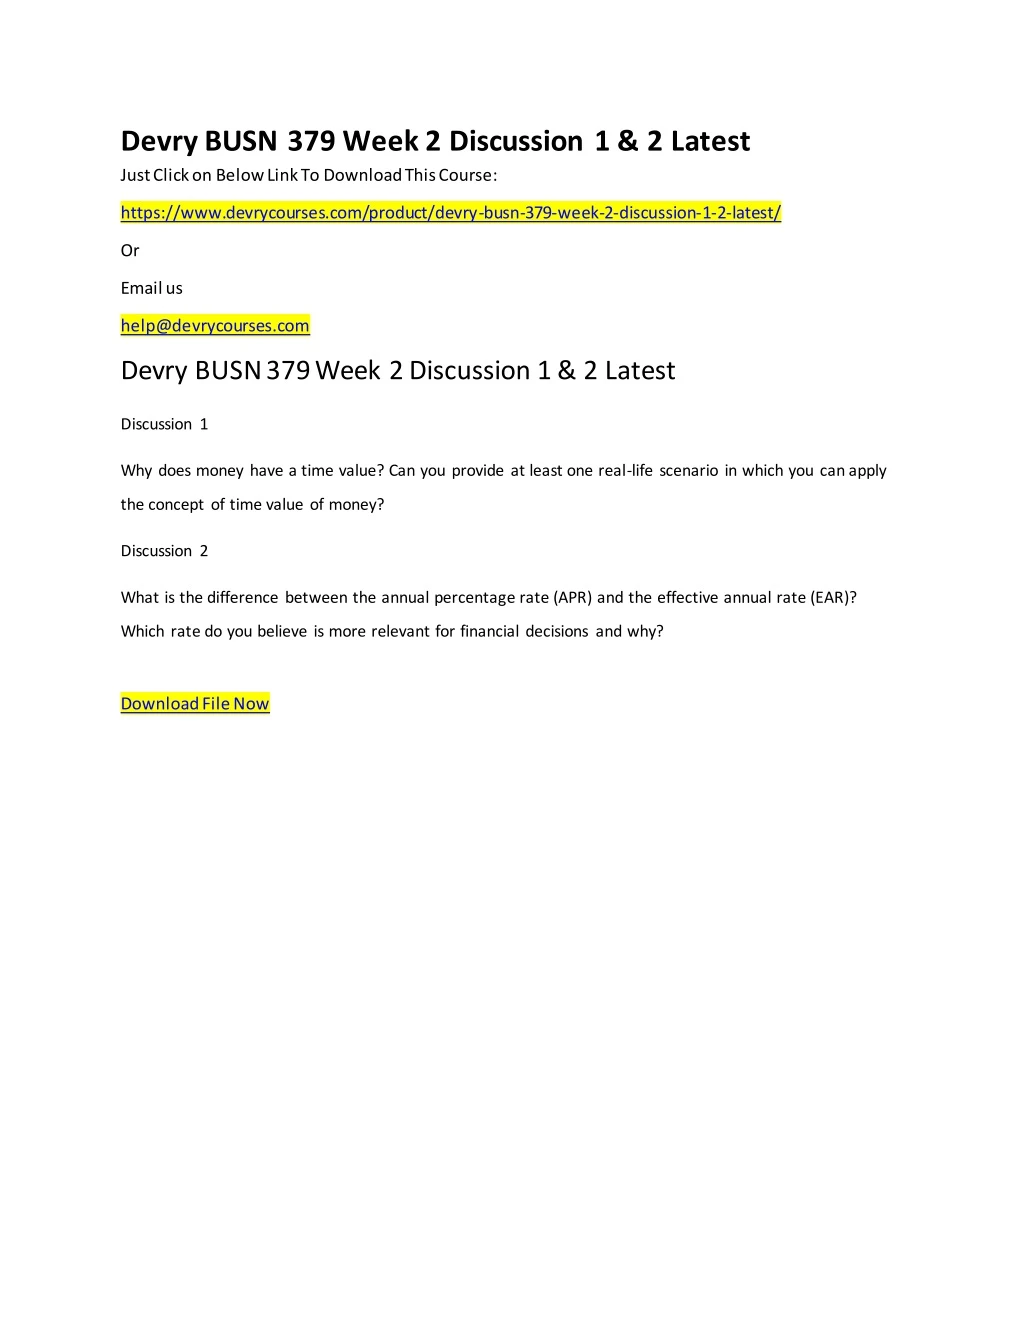 devry busn 379 week 2 discussion 1 2 latest just